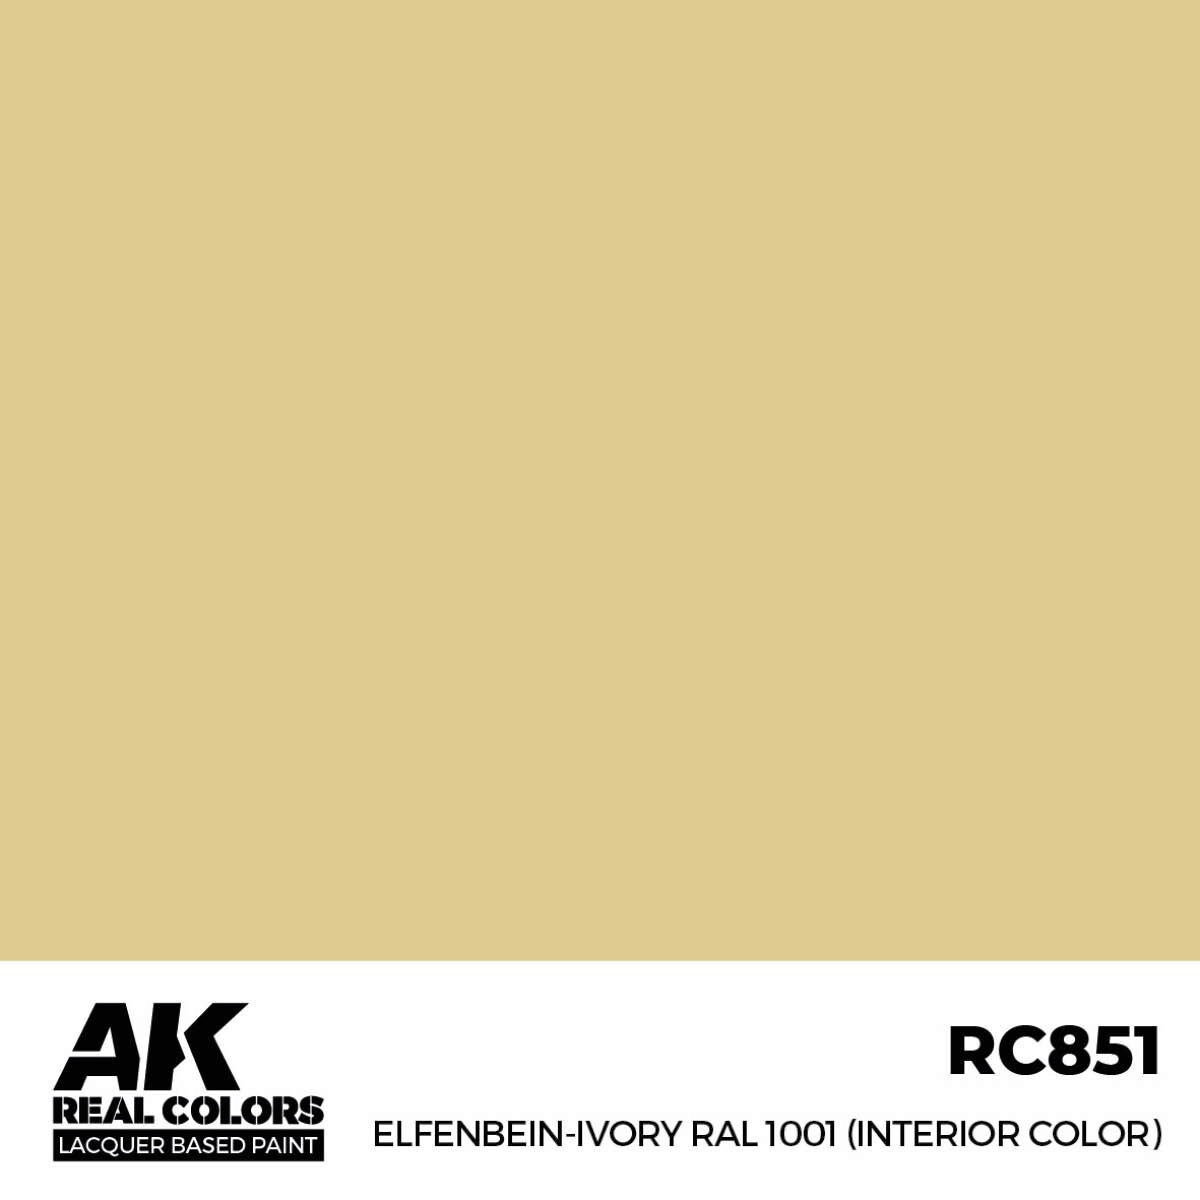 AK RC851 Real Colors Elfenbein-Ivory RAL 1001 (Interior Color) 17 ml.